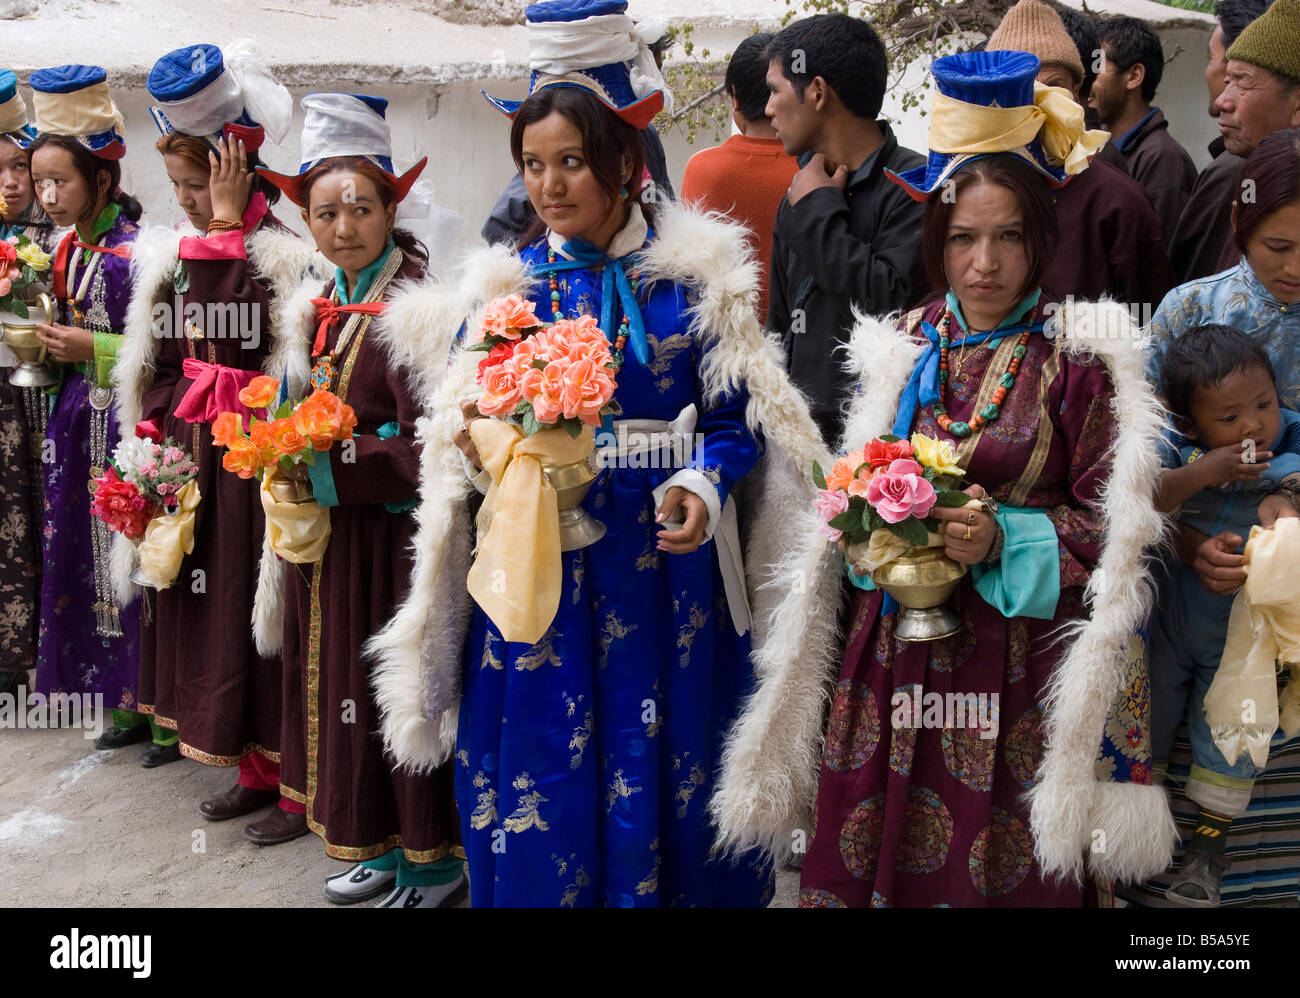 Group of young local women in full traditional costume waiting in a row for Lama, Alchi, Ladakh, India Stock Photo